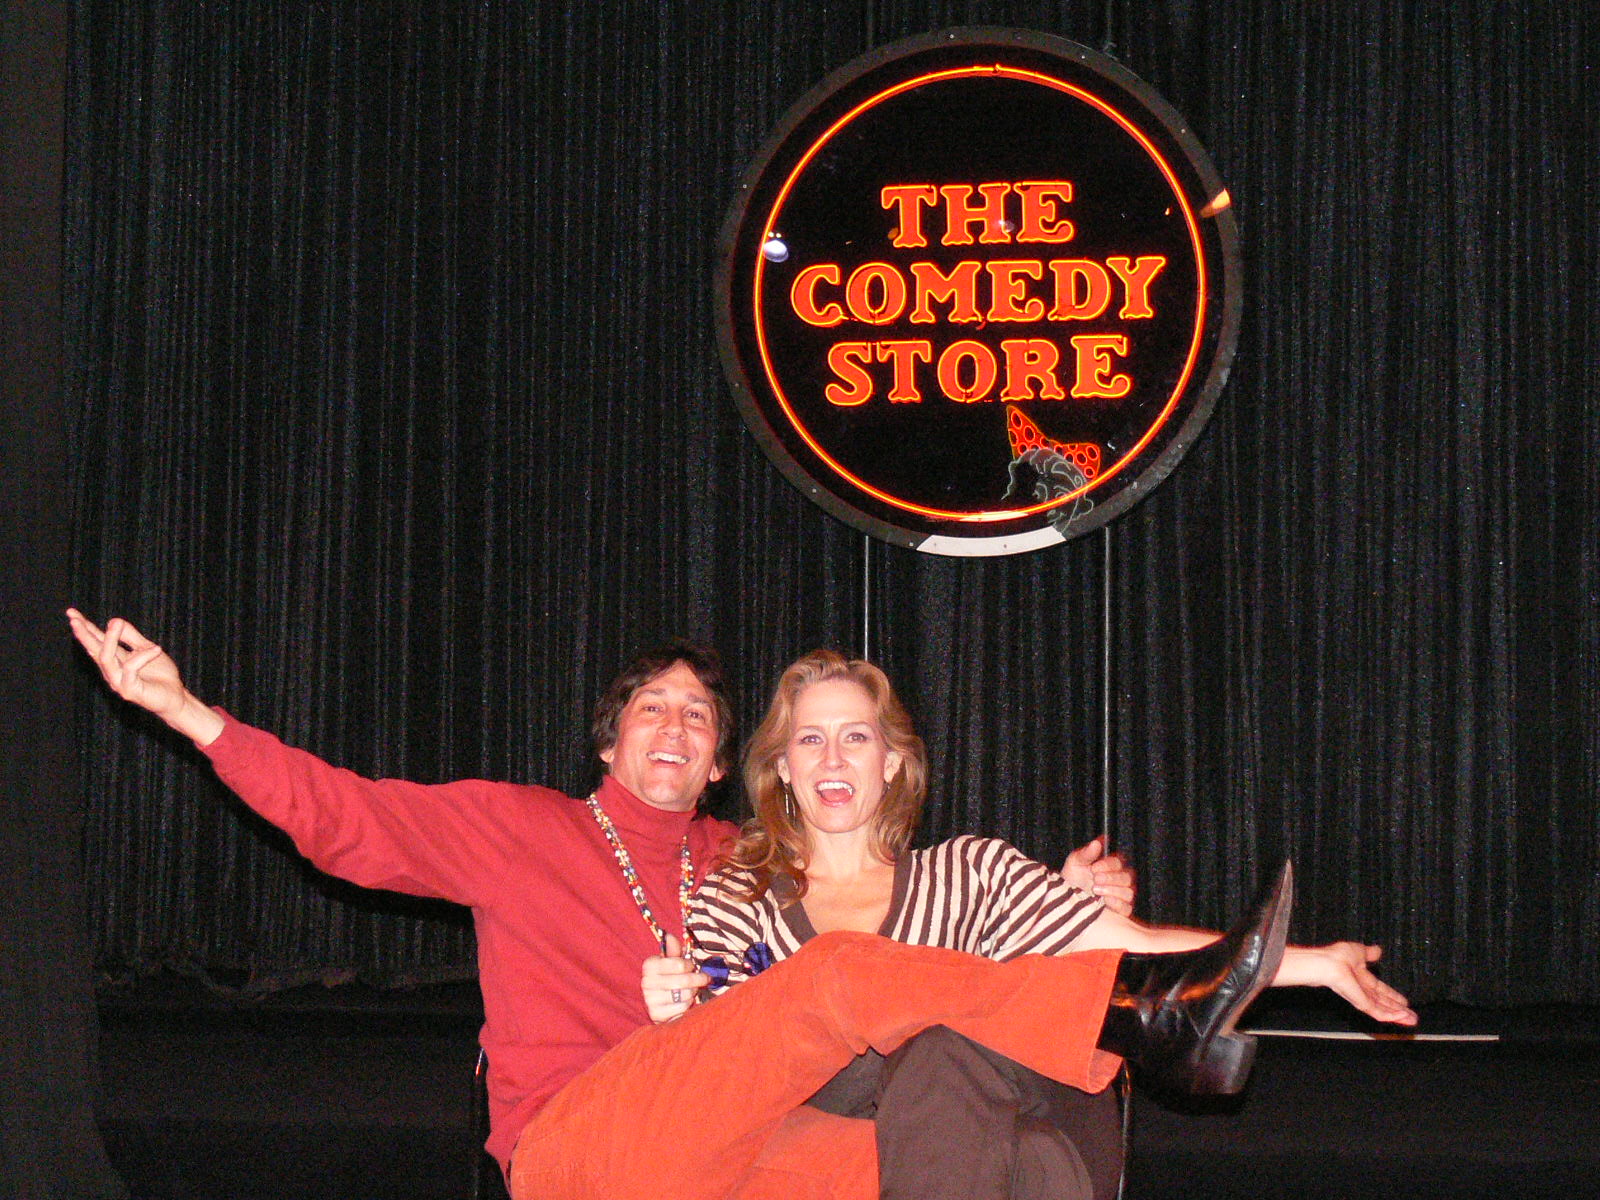 At the Comedy Store with Cathy Olaerts.